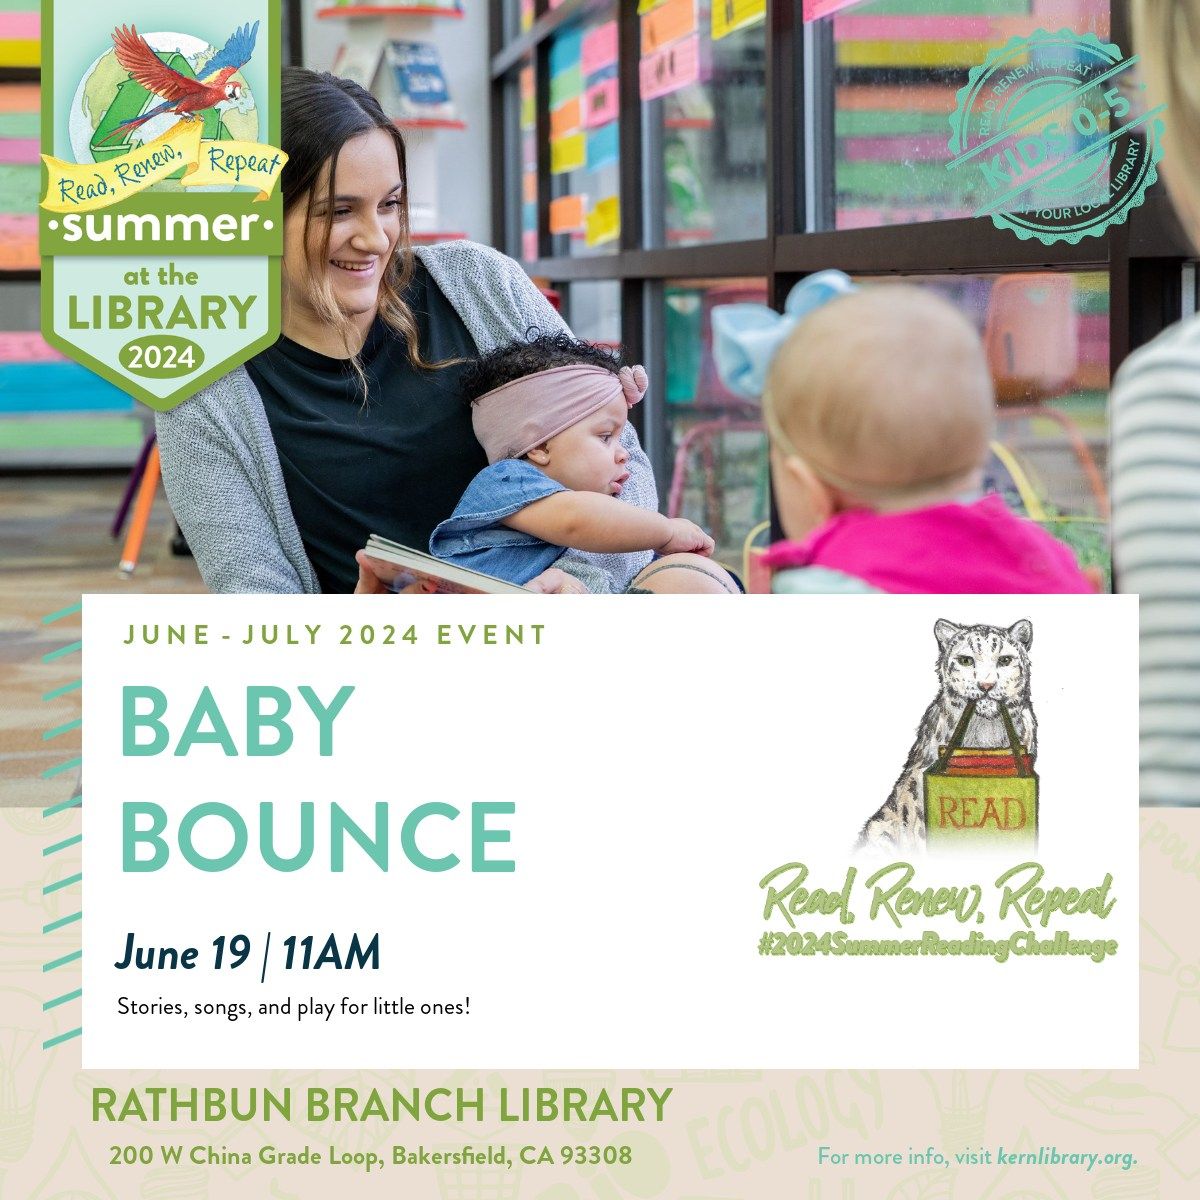 Baby Bounce @ the Library!